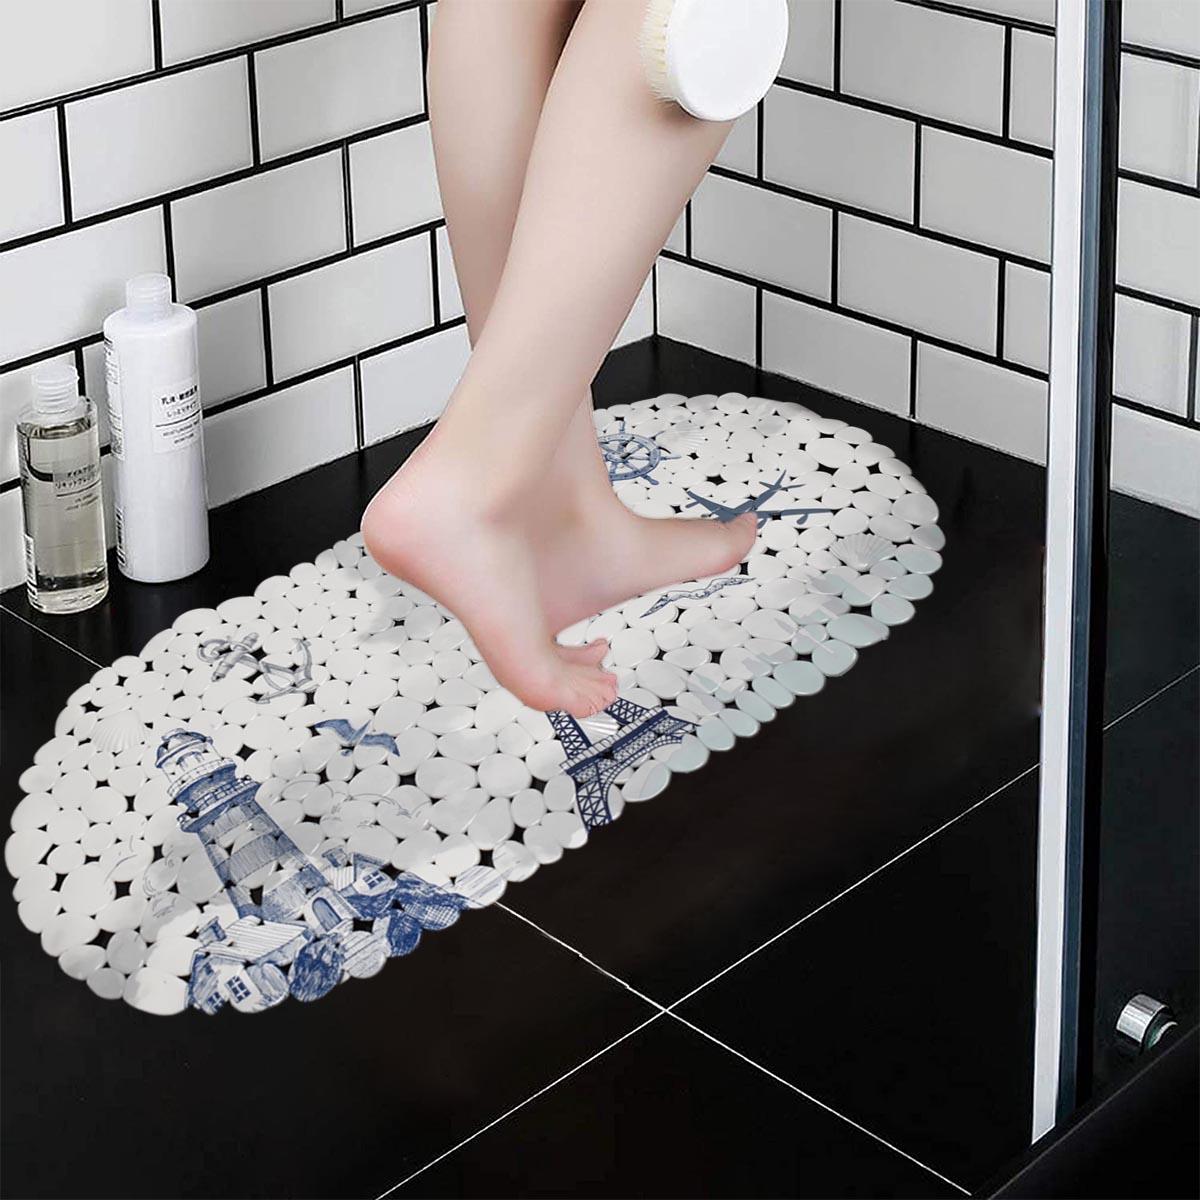 Kookee PVC Bath Mat Non-Slip Pebble Bathtub Mat L=69cm x W=35cm (for Smooth/Non-Textured Tubs Only) Safe Shower Mat with Drain Holes, Suction Cups for Bathroom (35-4935)